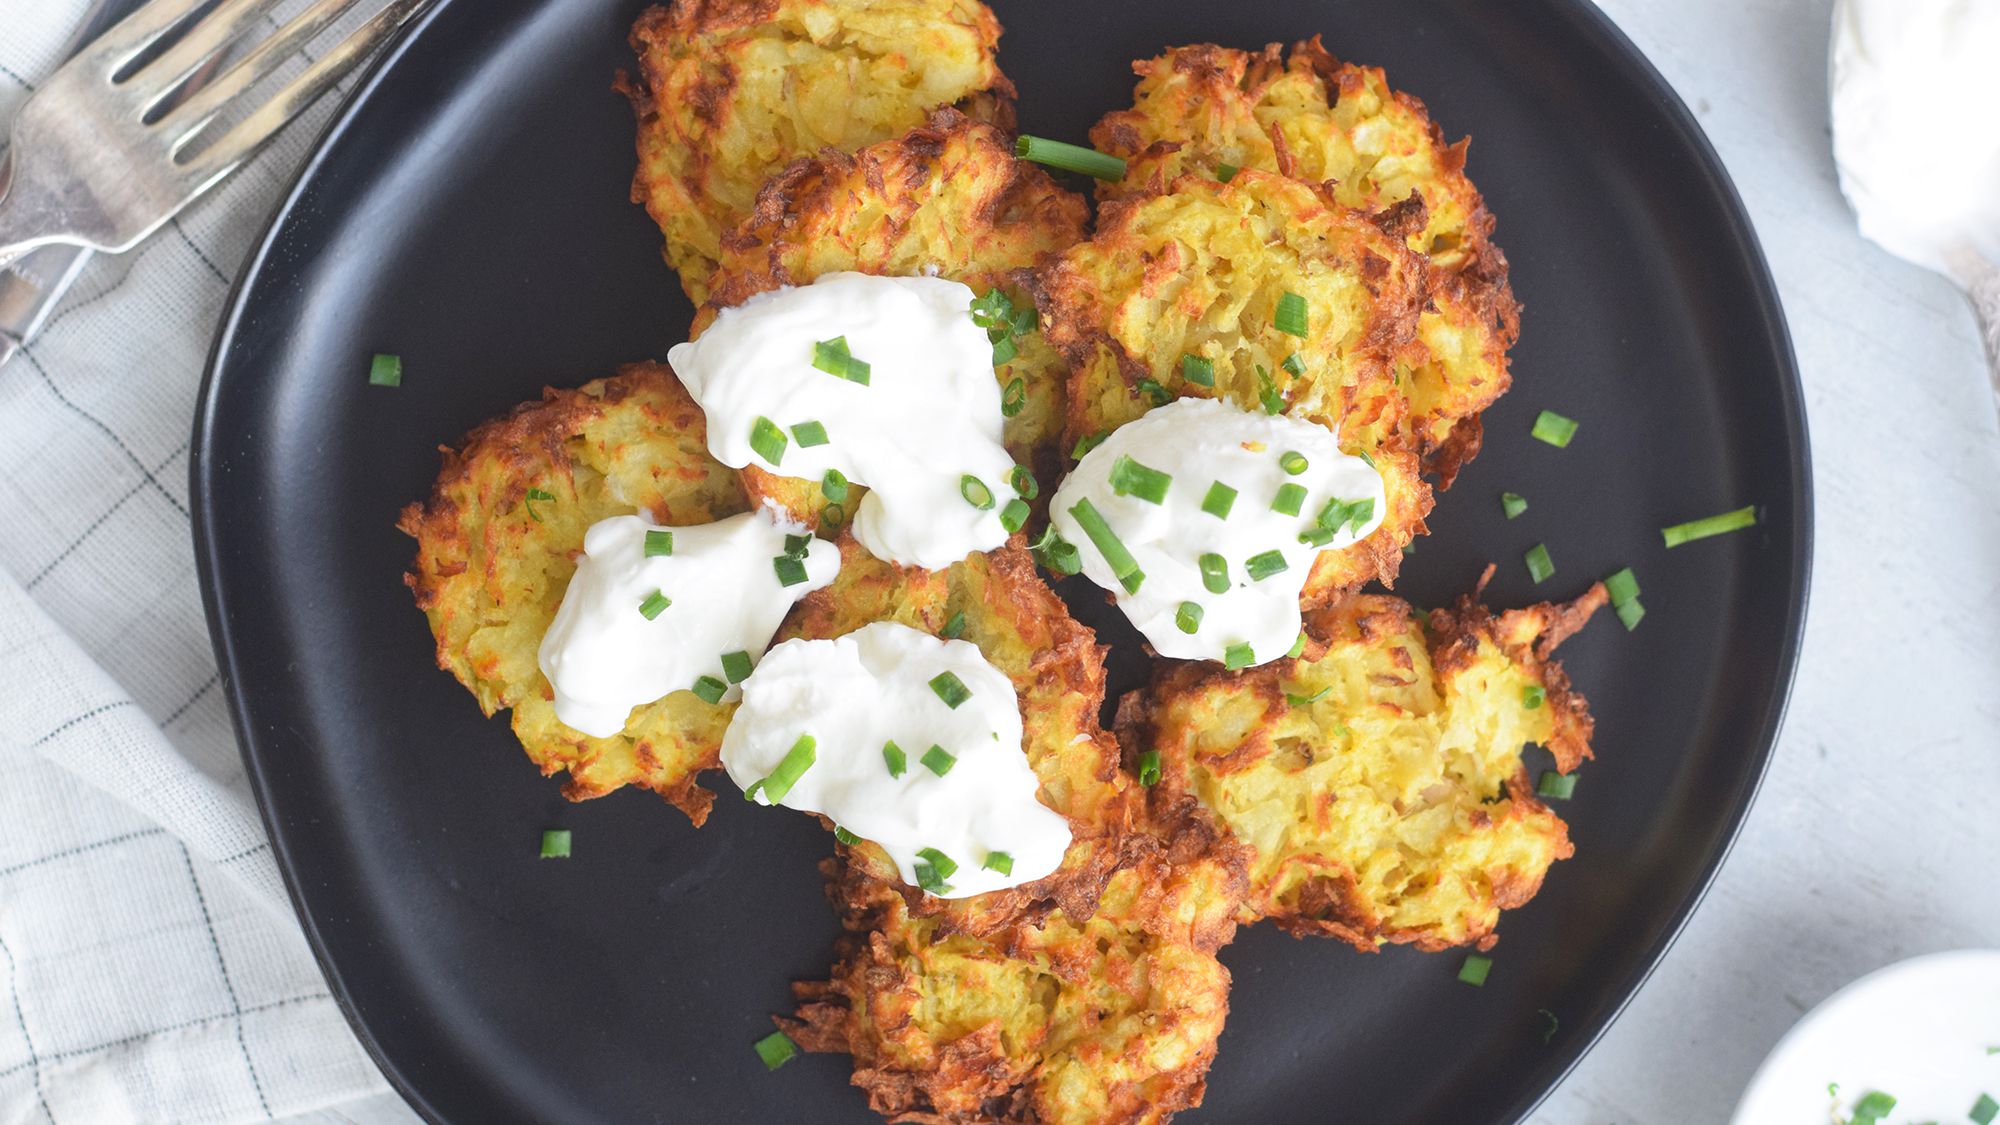 What are the potato pancakes made during Hanukkah called?